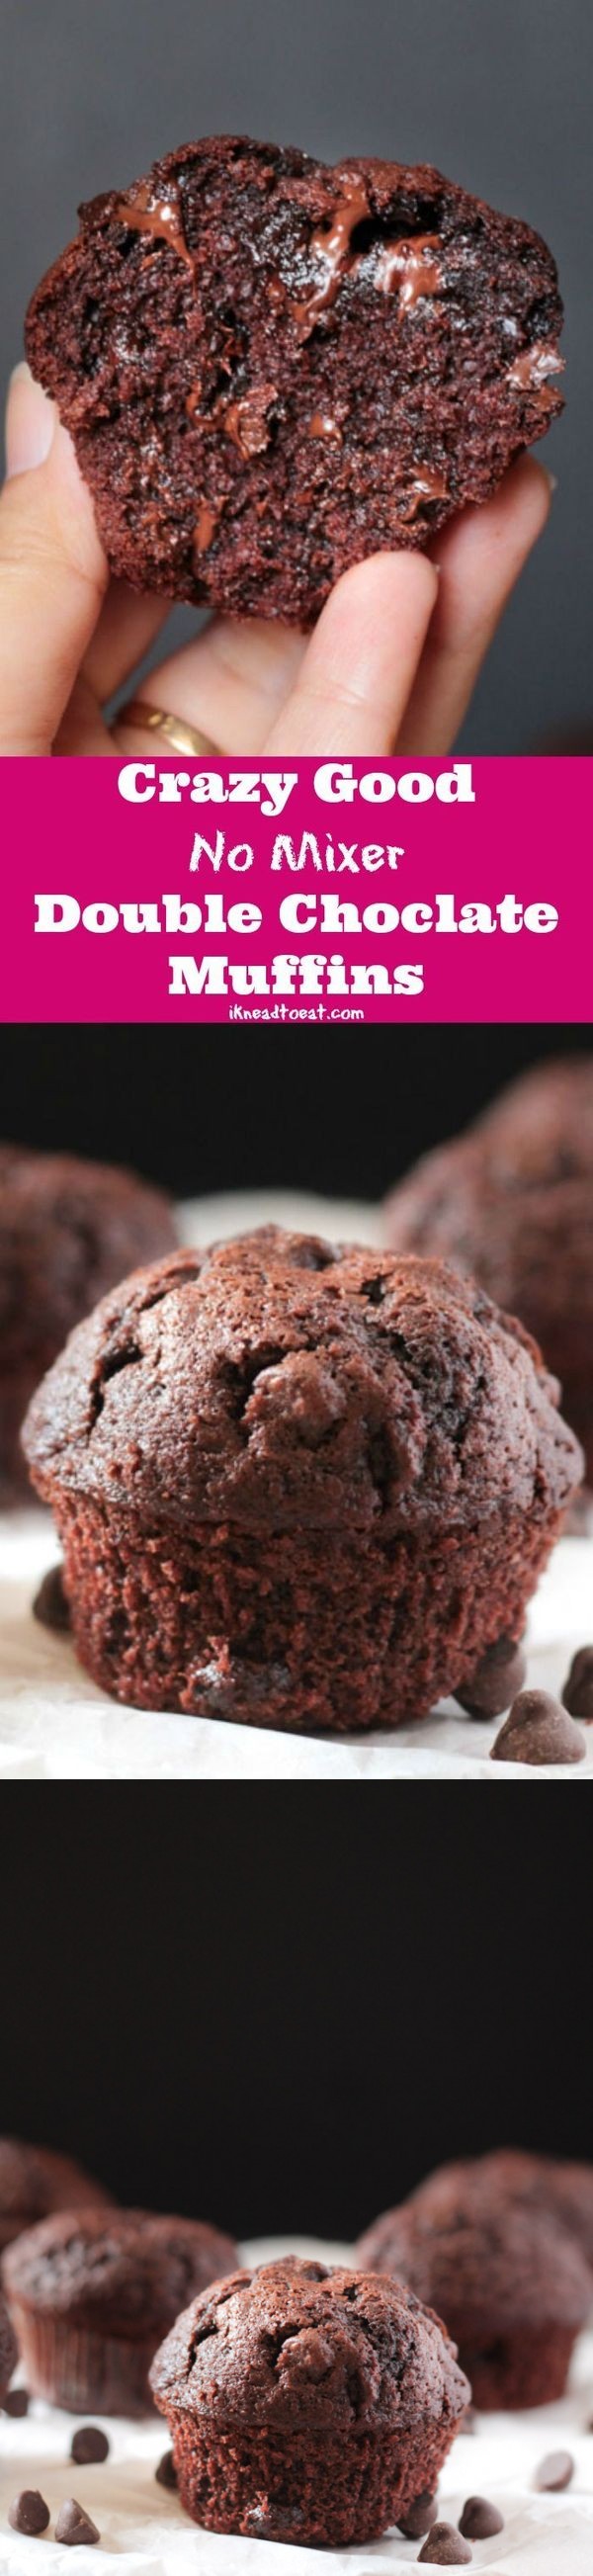 No Mixer Double Chocolate Muffins